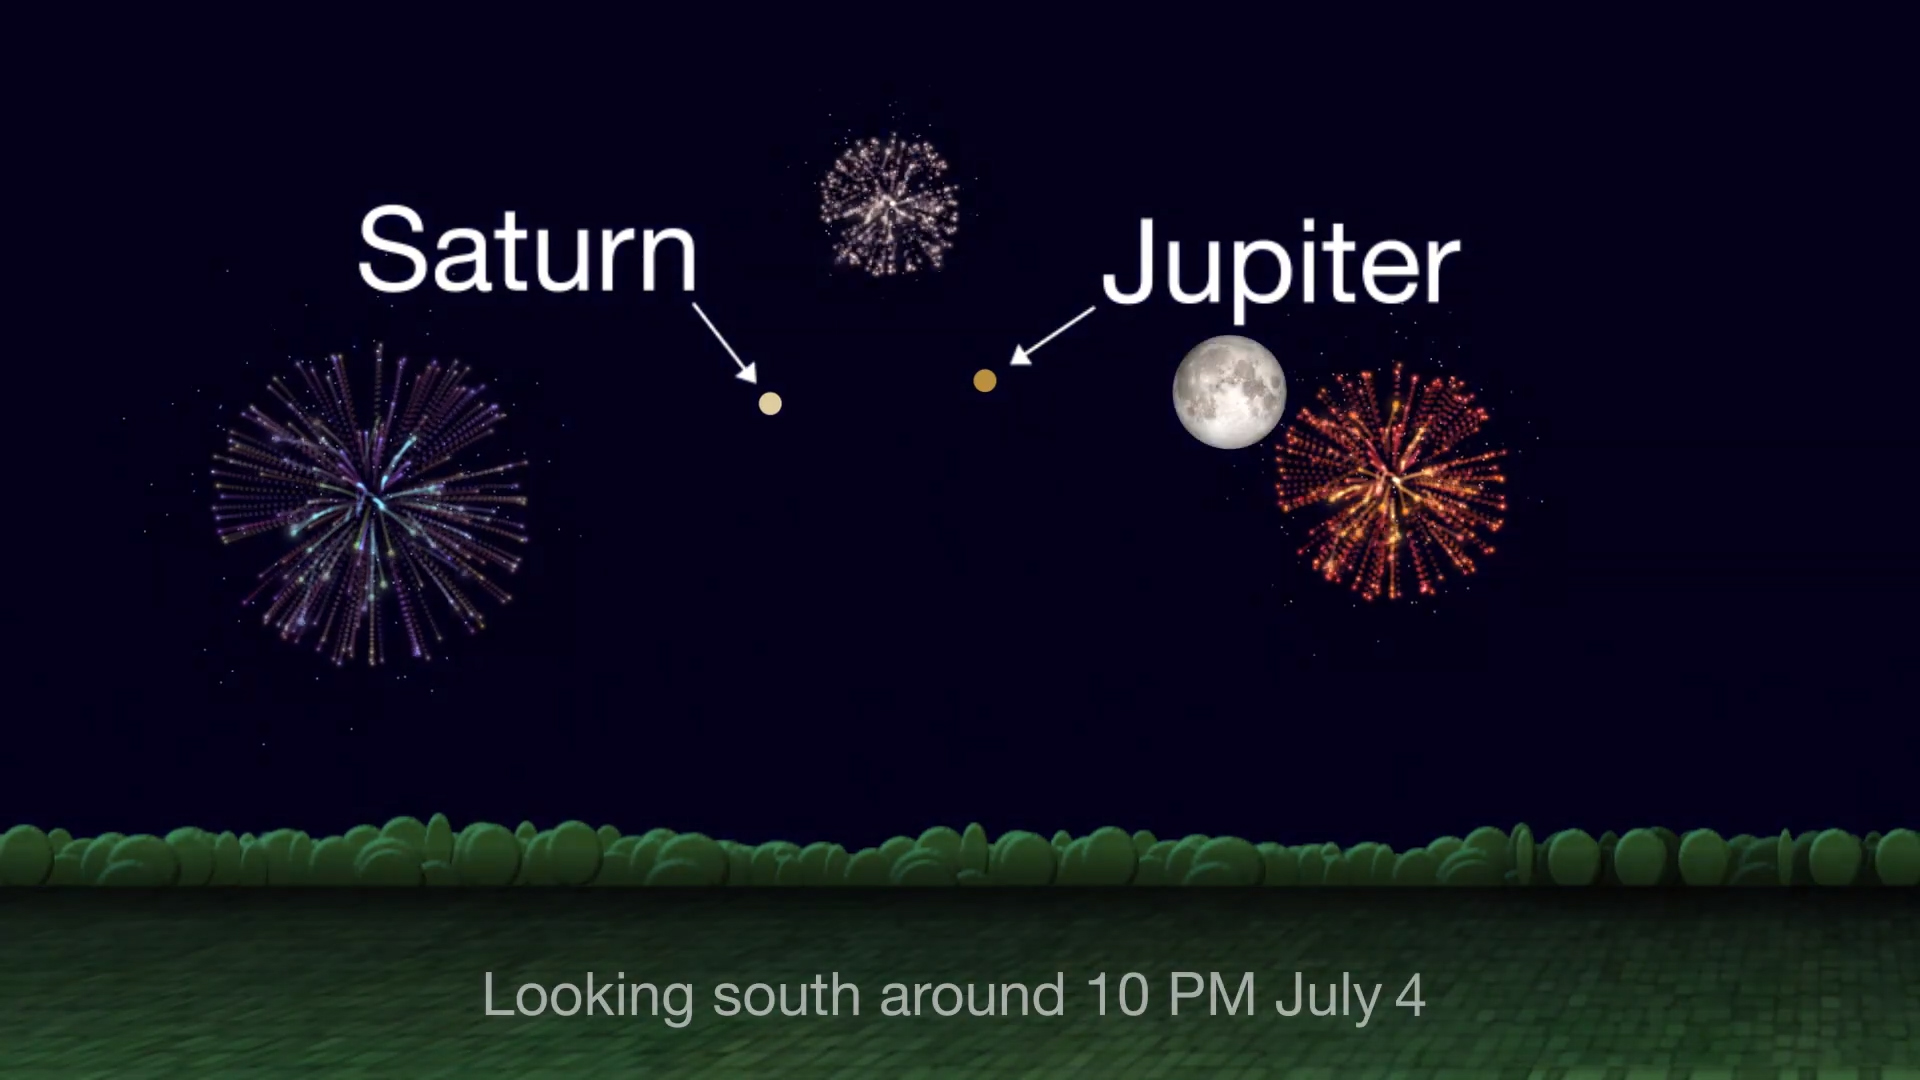 Sky chart showing positions of the Moon, Jupiter and Saturn on July 4th with fireworks graphics.